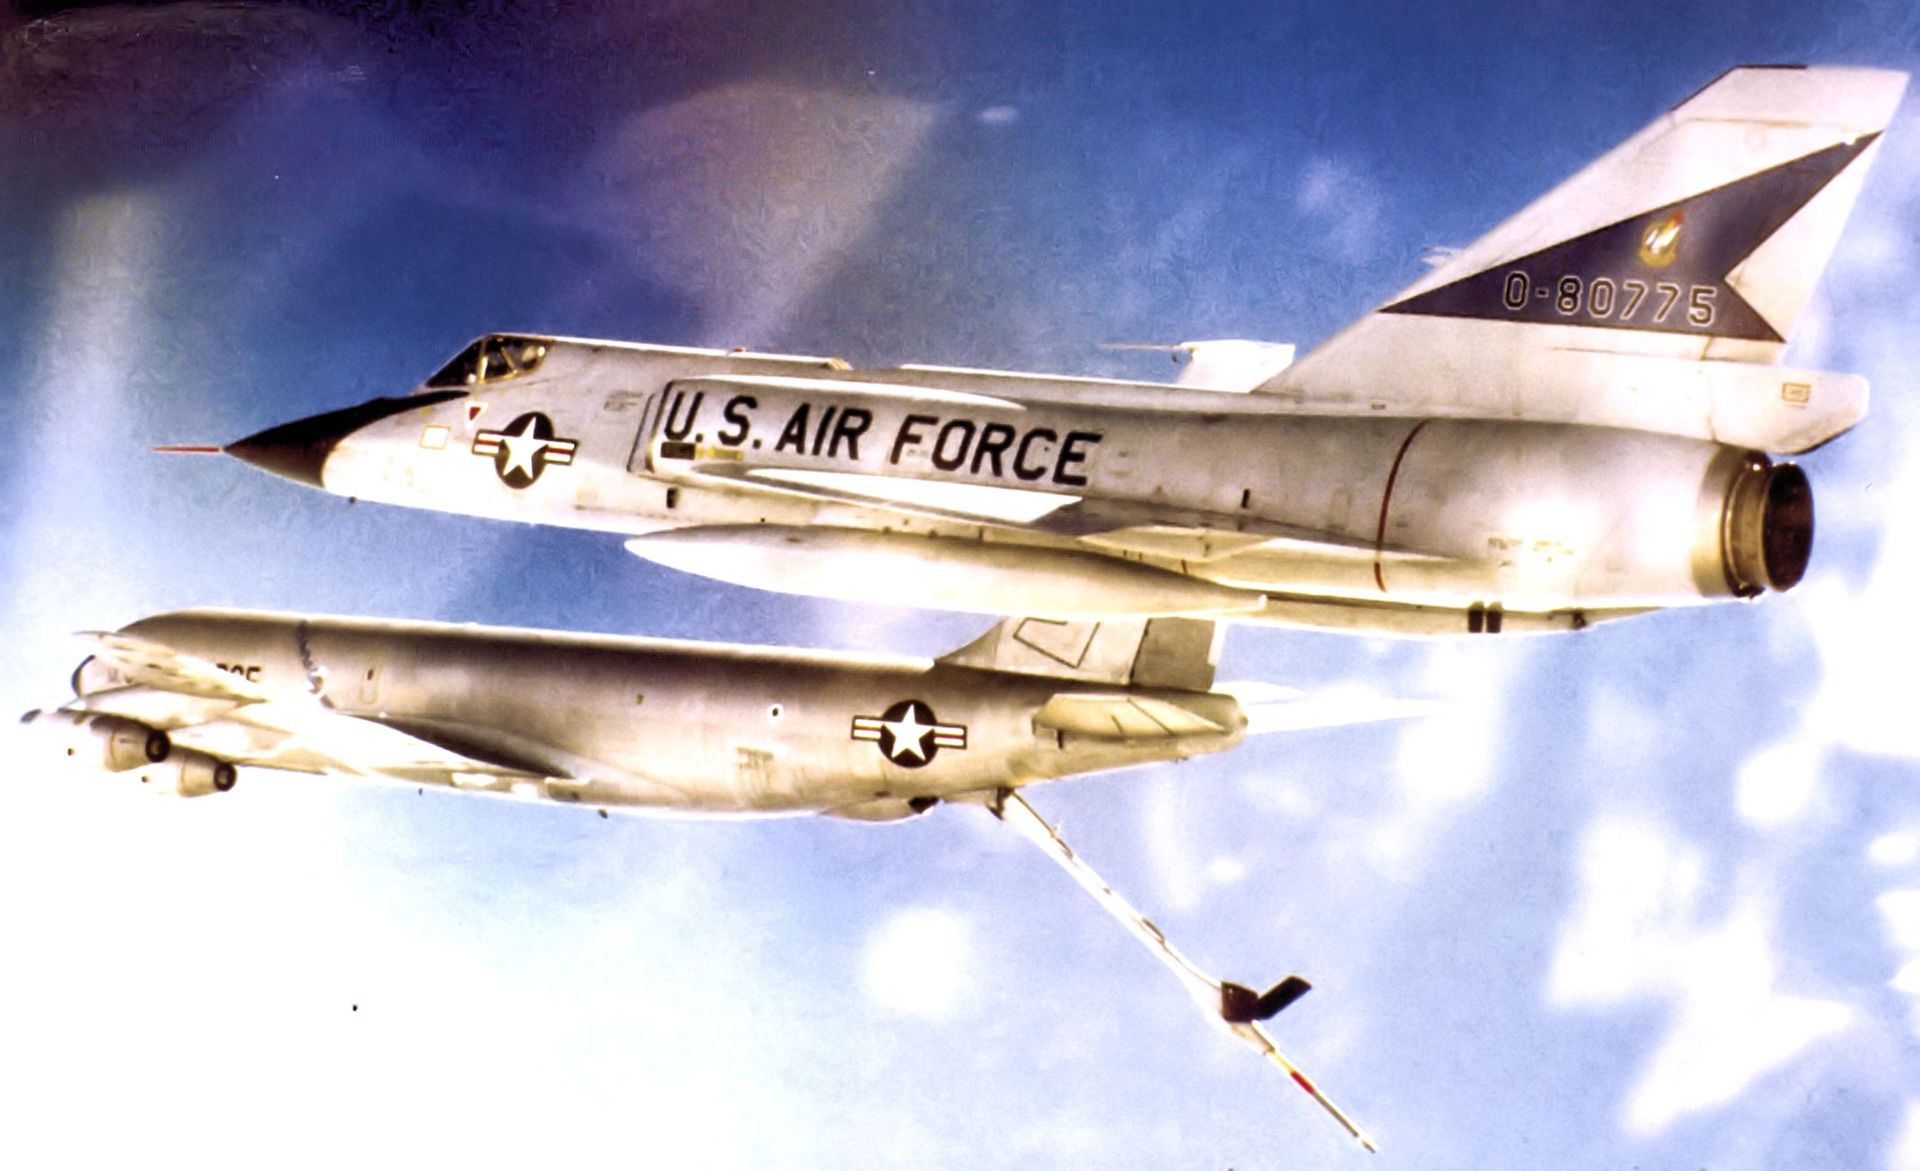 Convair F-106A Delta Dart of the 71st Fighter Interceptor Squadron, with a Boeing KC-135 Stratotanker, circa 1970. (U.S. Air Force)